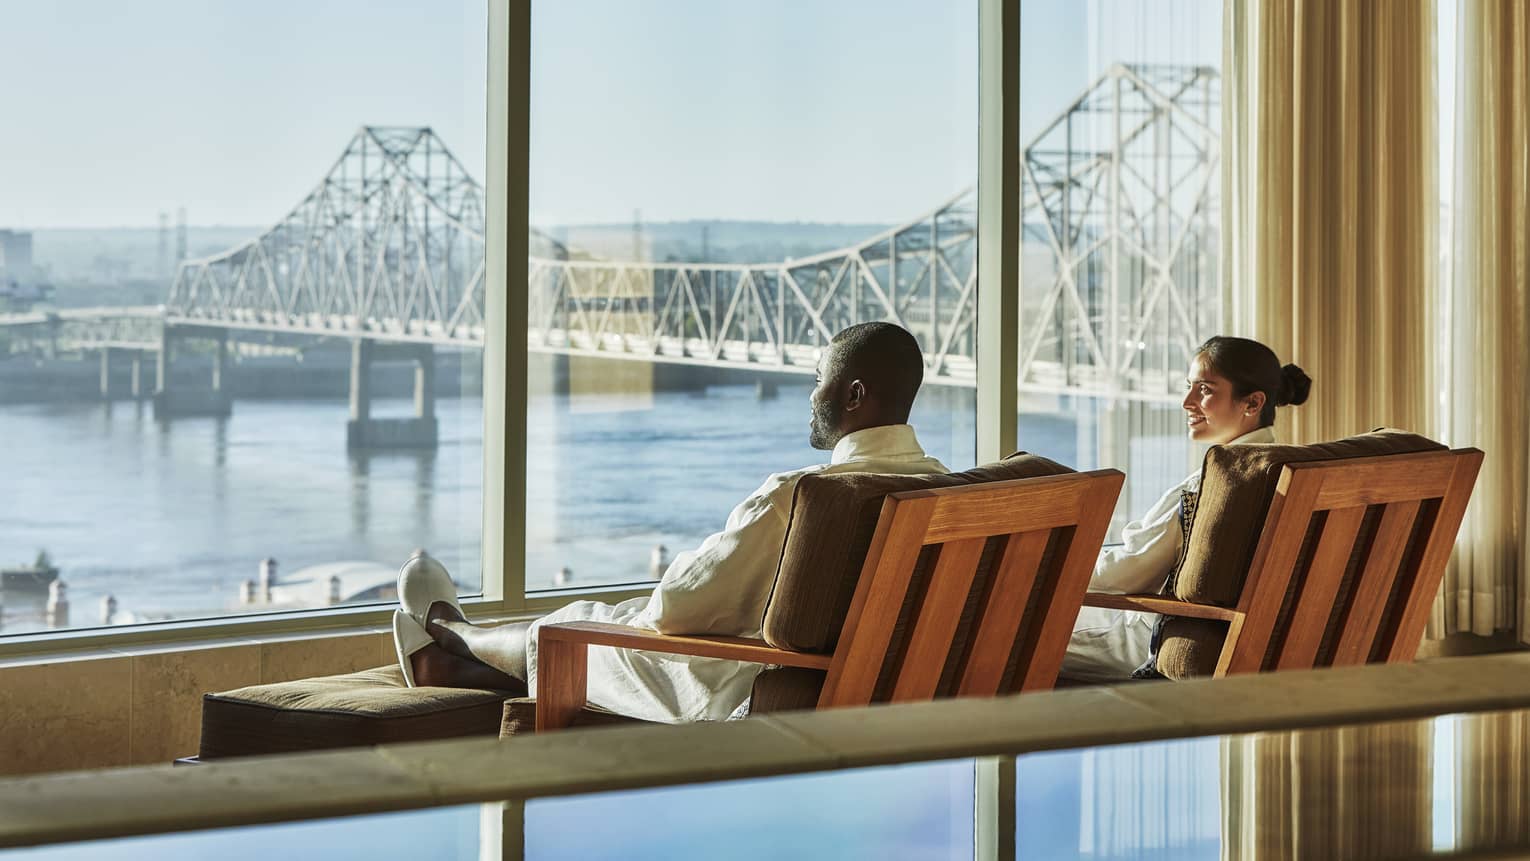 Couple lounge in chairs by large windows overlooking water, St. Louis bridge